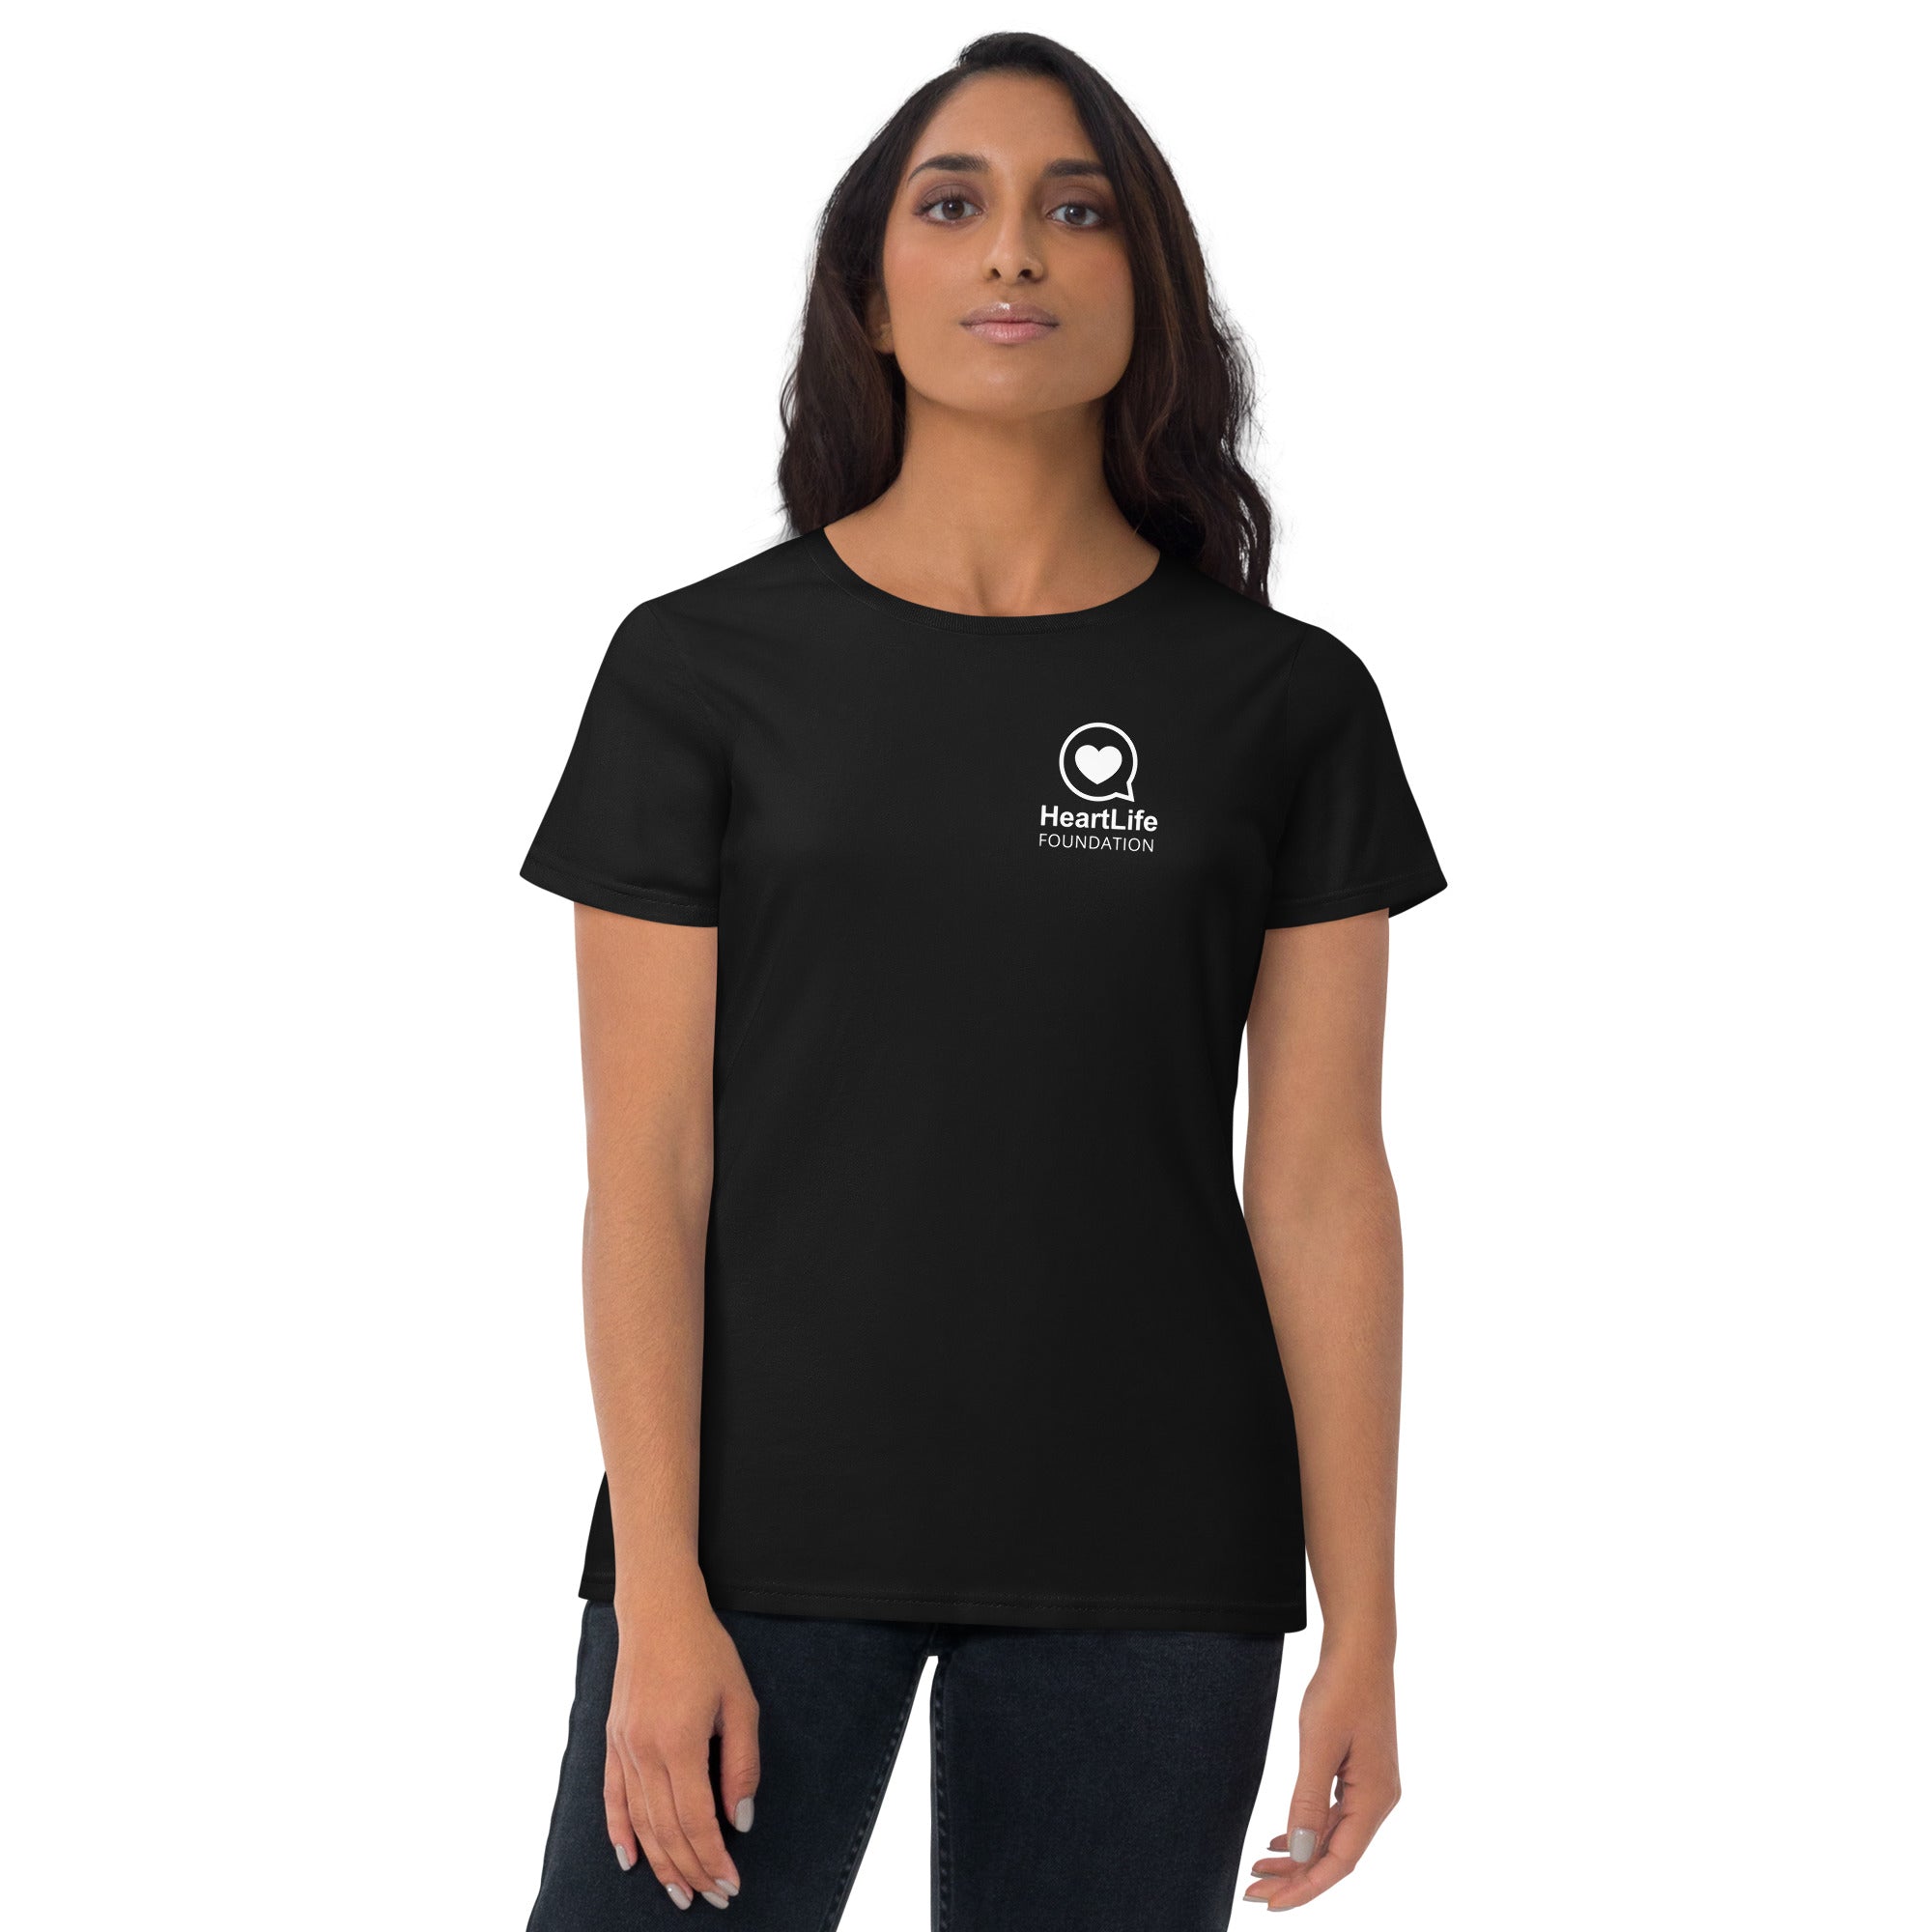 "It’s About Life!" Women's T-Shirt